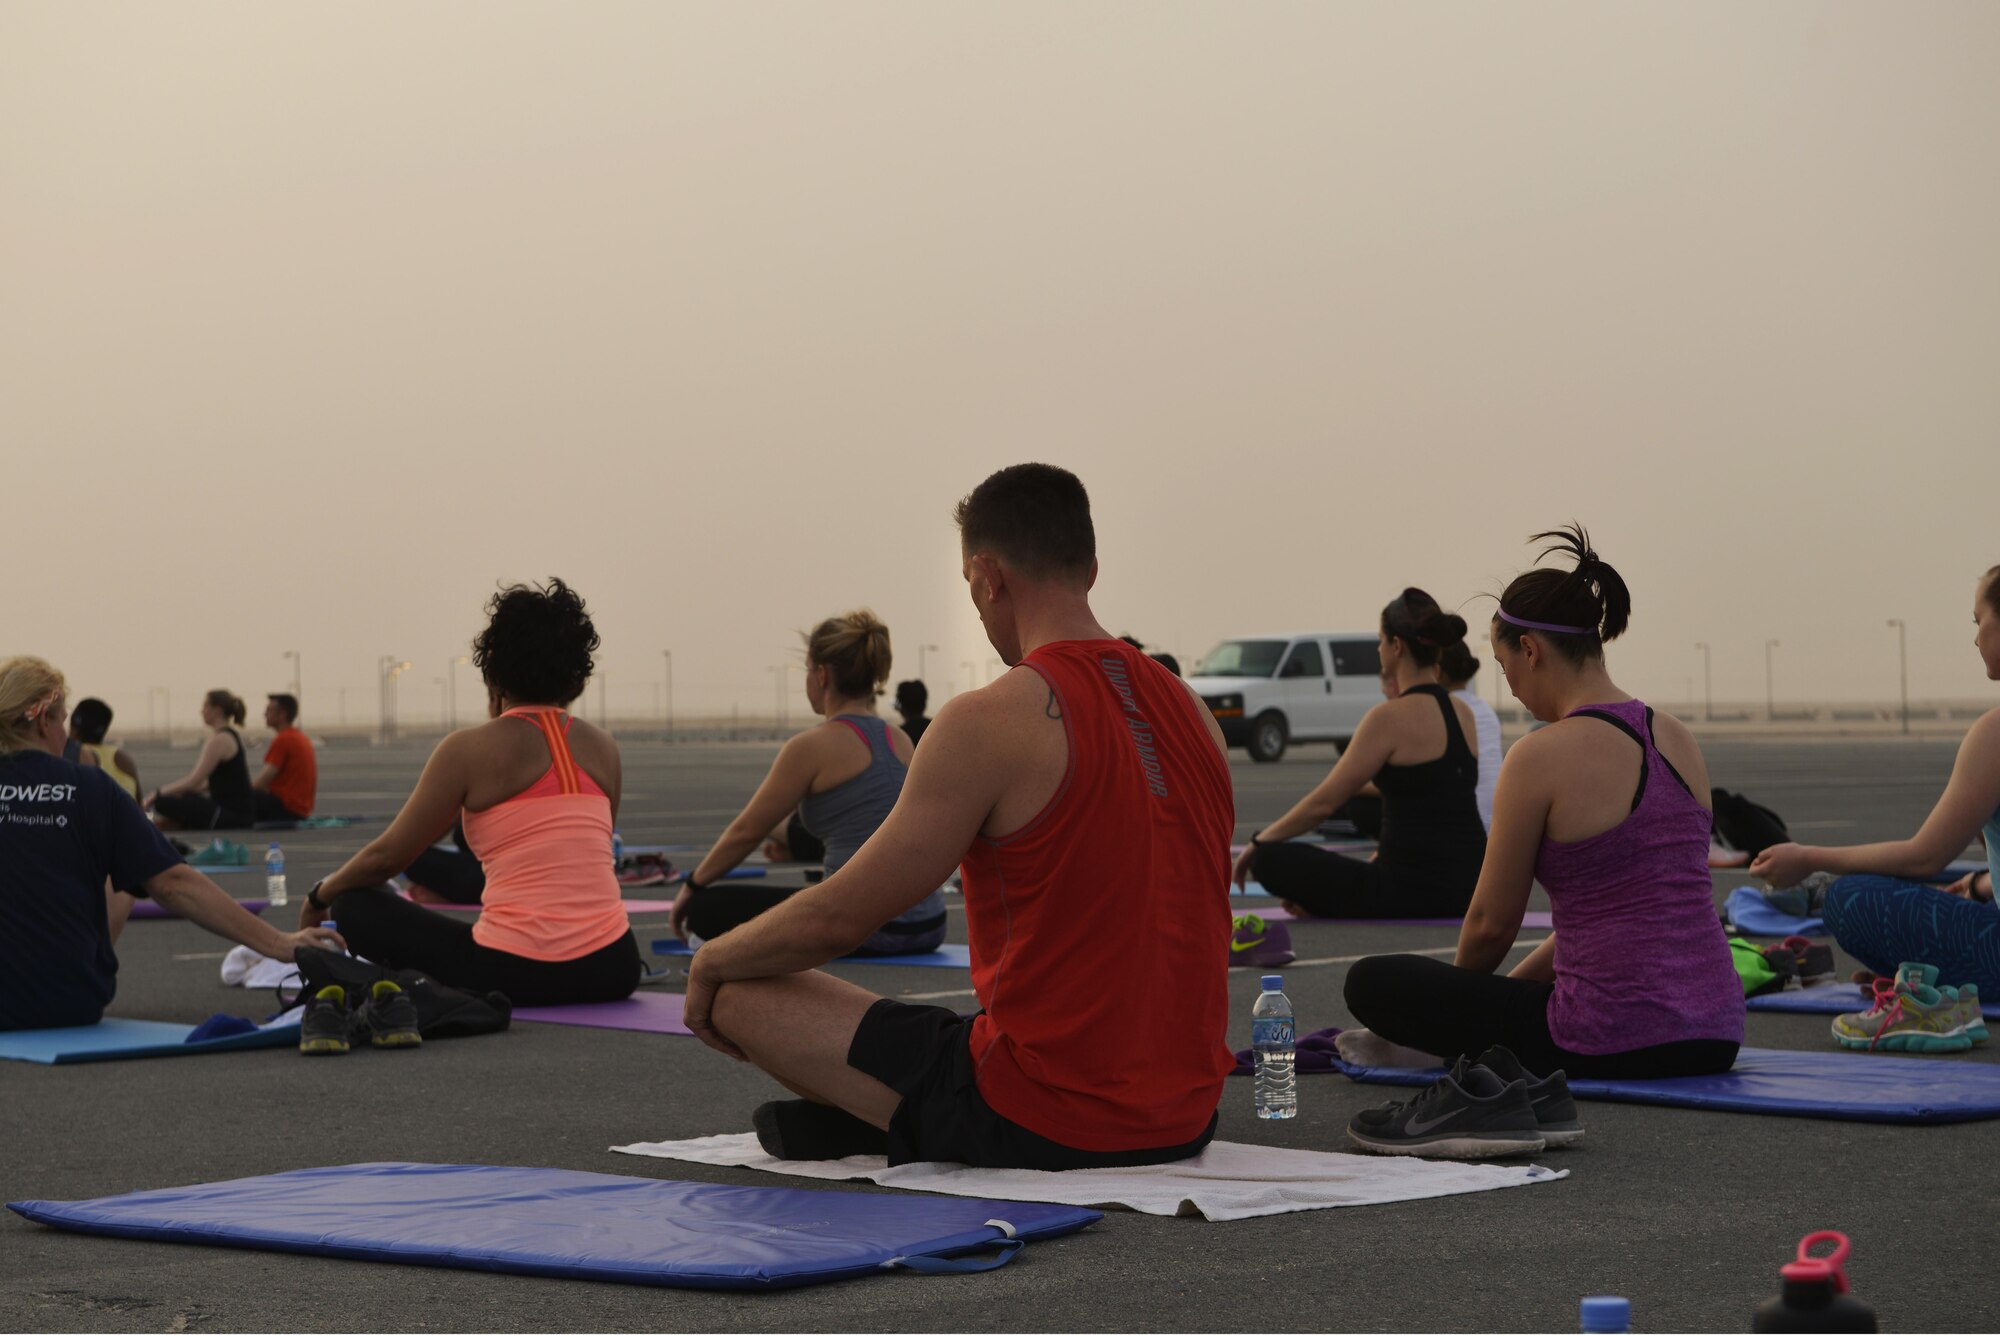 Deployed Soldiers, sailors, airmen, marines, coalition partners and civilians go relax as they finish the largest Yoga session to take place in Qatar history July 11, 2015 Al Udeid Air Base, Qatar. This event opened its doors to all levels of practitioners from novice to expert. It allowed the fine men and women assigned to Al Udeid Air Base to relax and enjoy a different kind of exercise in a neutral environment. (U.S. Air Force photo/Staff Sgt. Alexandre Montes)
